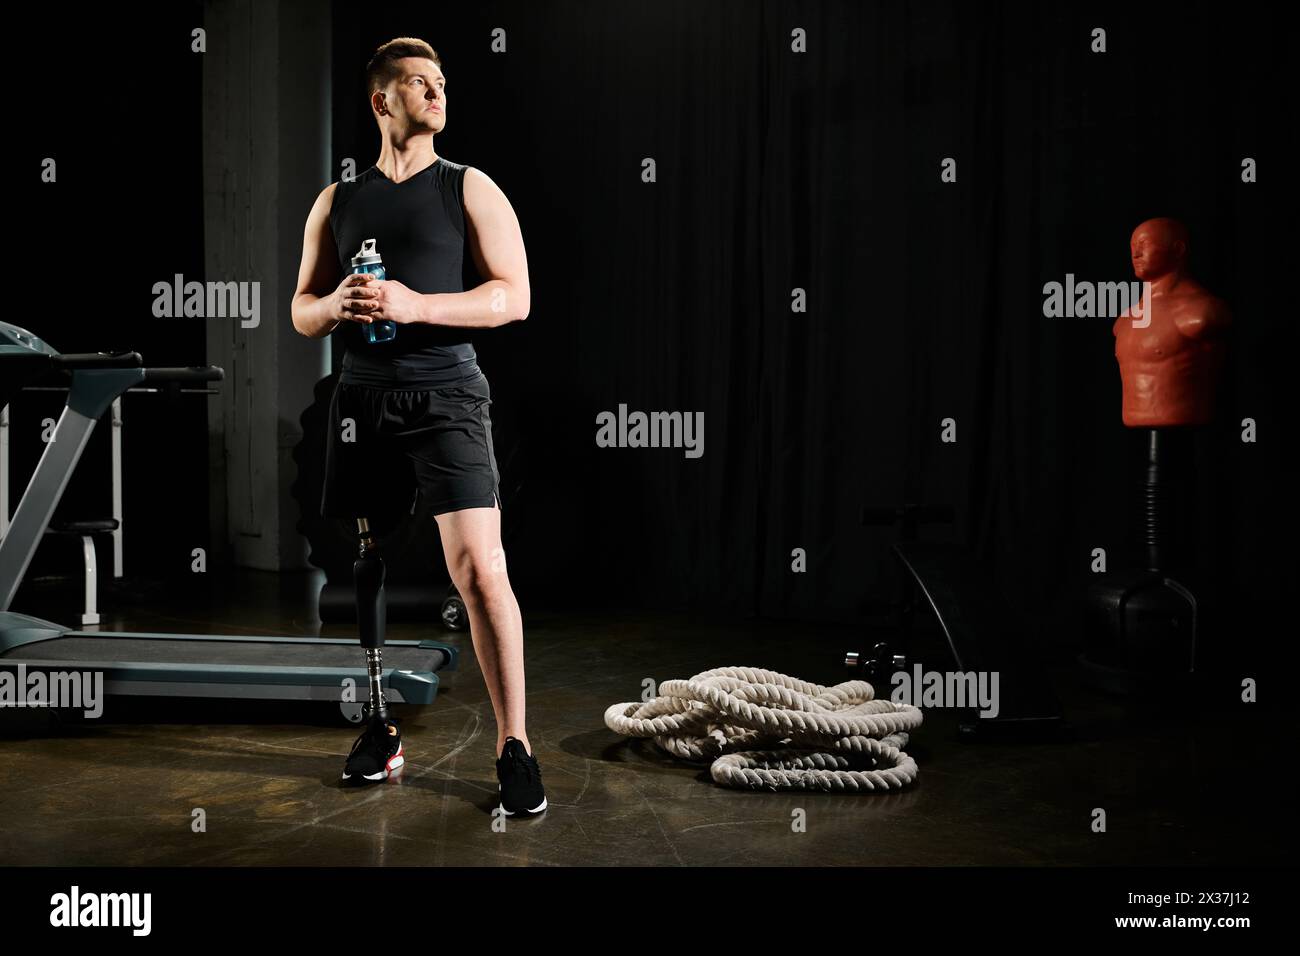 A man with a prosthetic leg stands confidently in front of gym equipment, showcasing determination and resilience in his workout routine. Stock Photo